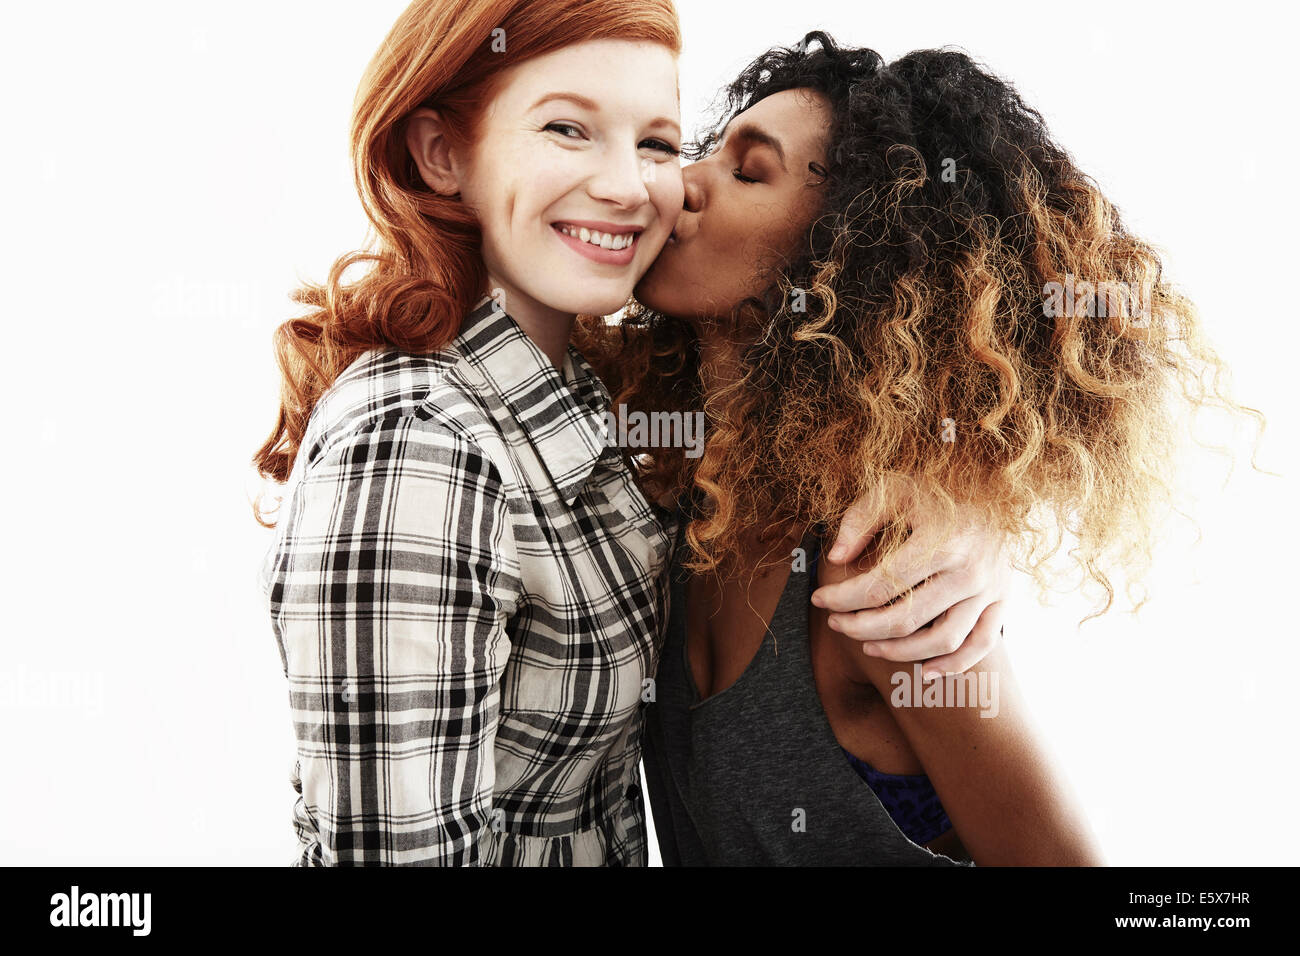 Studio portrait of two young adult women friends Stock Photo